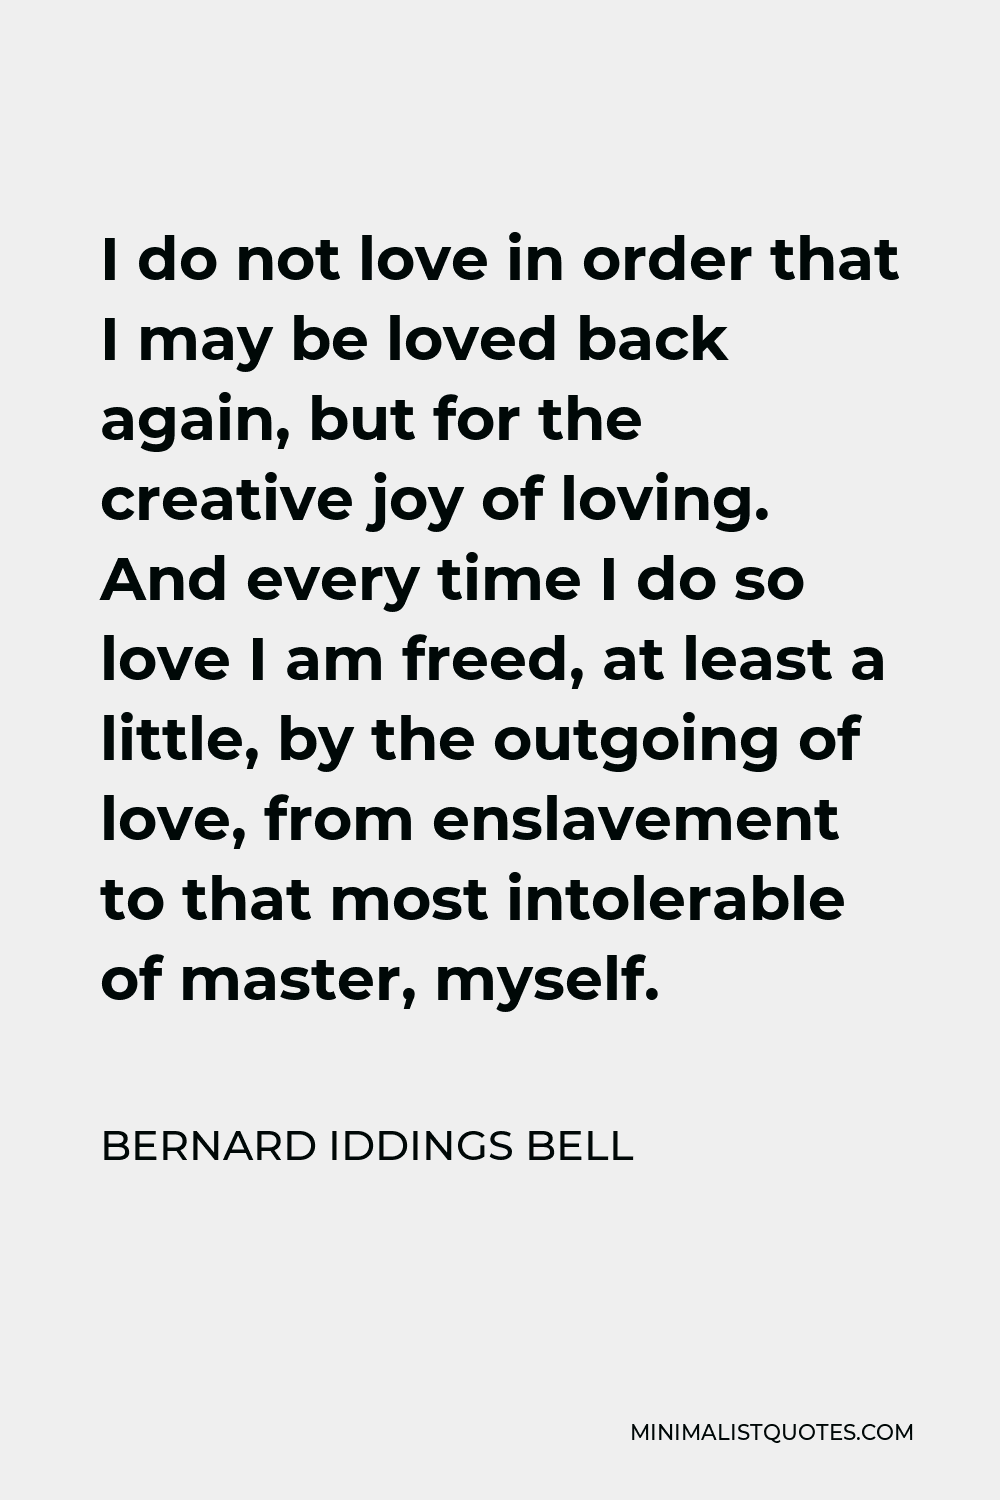 Bernard Iddings Bell Quote - I do not love in order that I may be loved back again, but for the creative joy of loving. And every time I do so love I am freed, at least a little, by the outgoing of love, from enslavement to that most intolerable of master, myself.